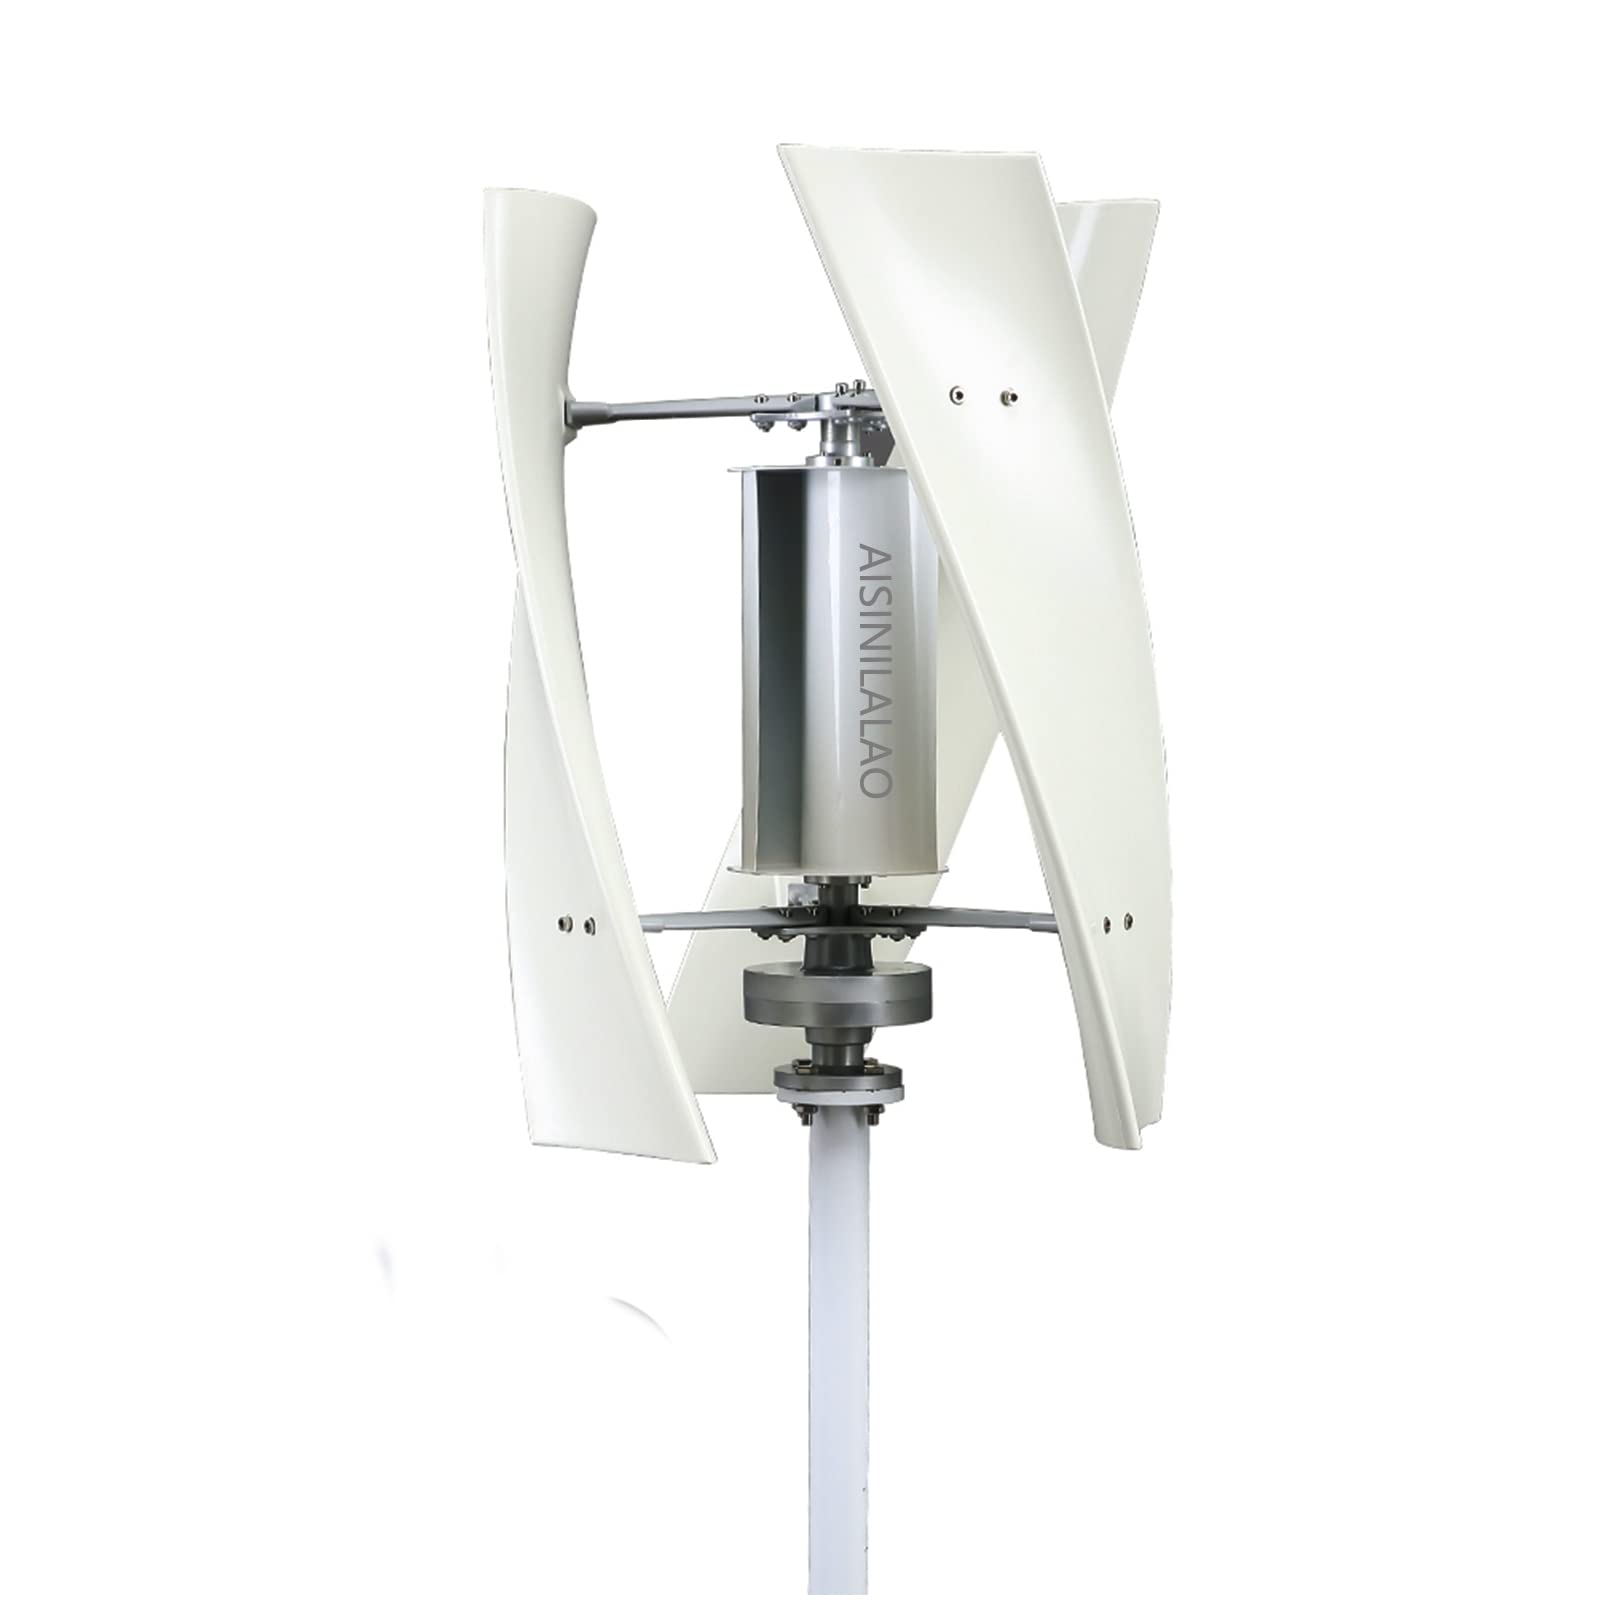 AISINILALAO 12000W Vertical Wind Turbine Generator with Hybrid Controller Off Grid System Inverter for Home Free Energy with Windmill,48v